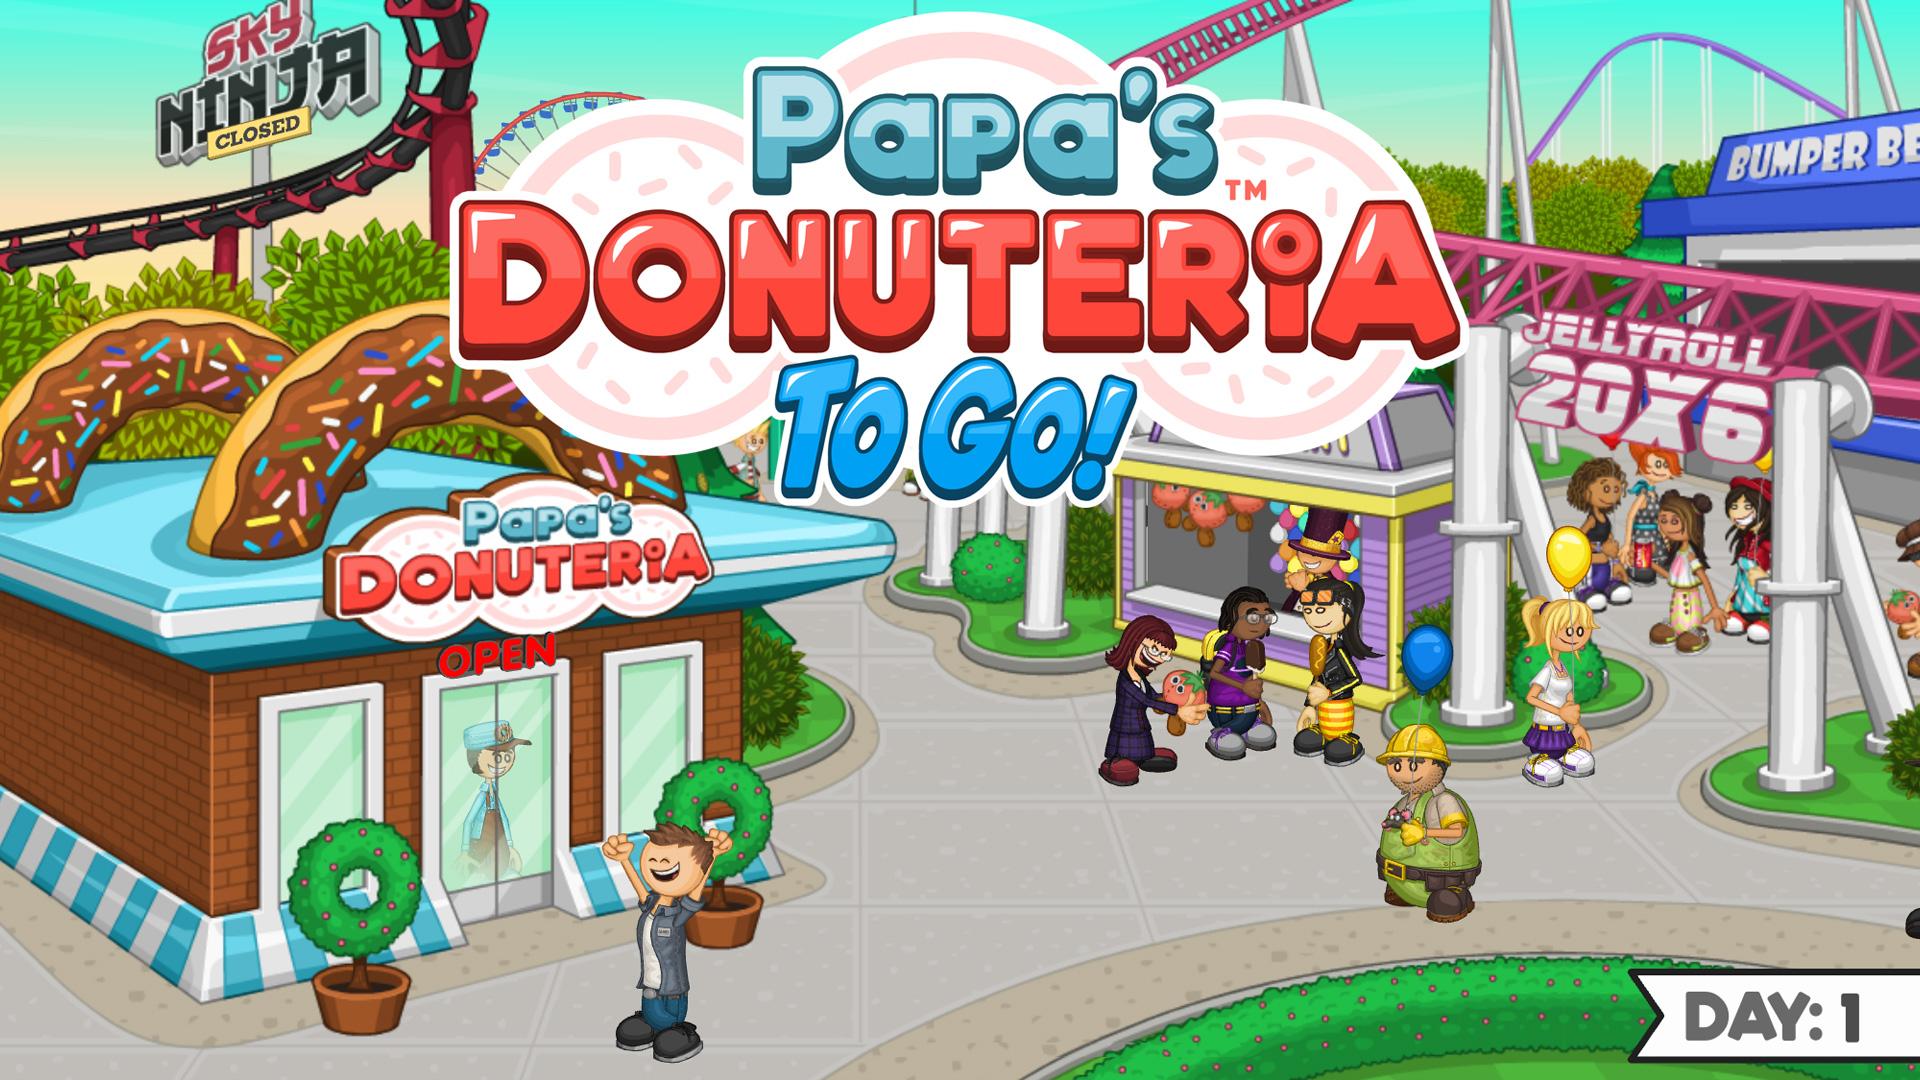 Download Papa's Donuteria To Go! Android free game.